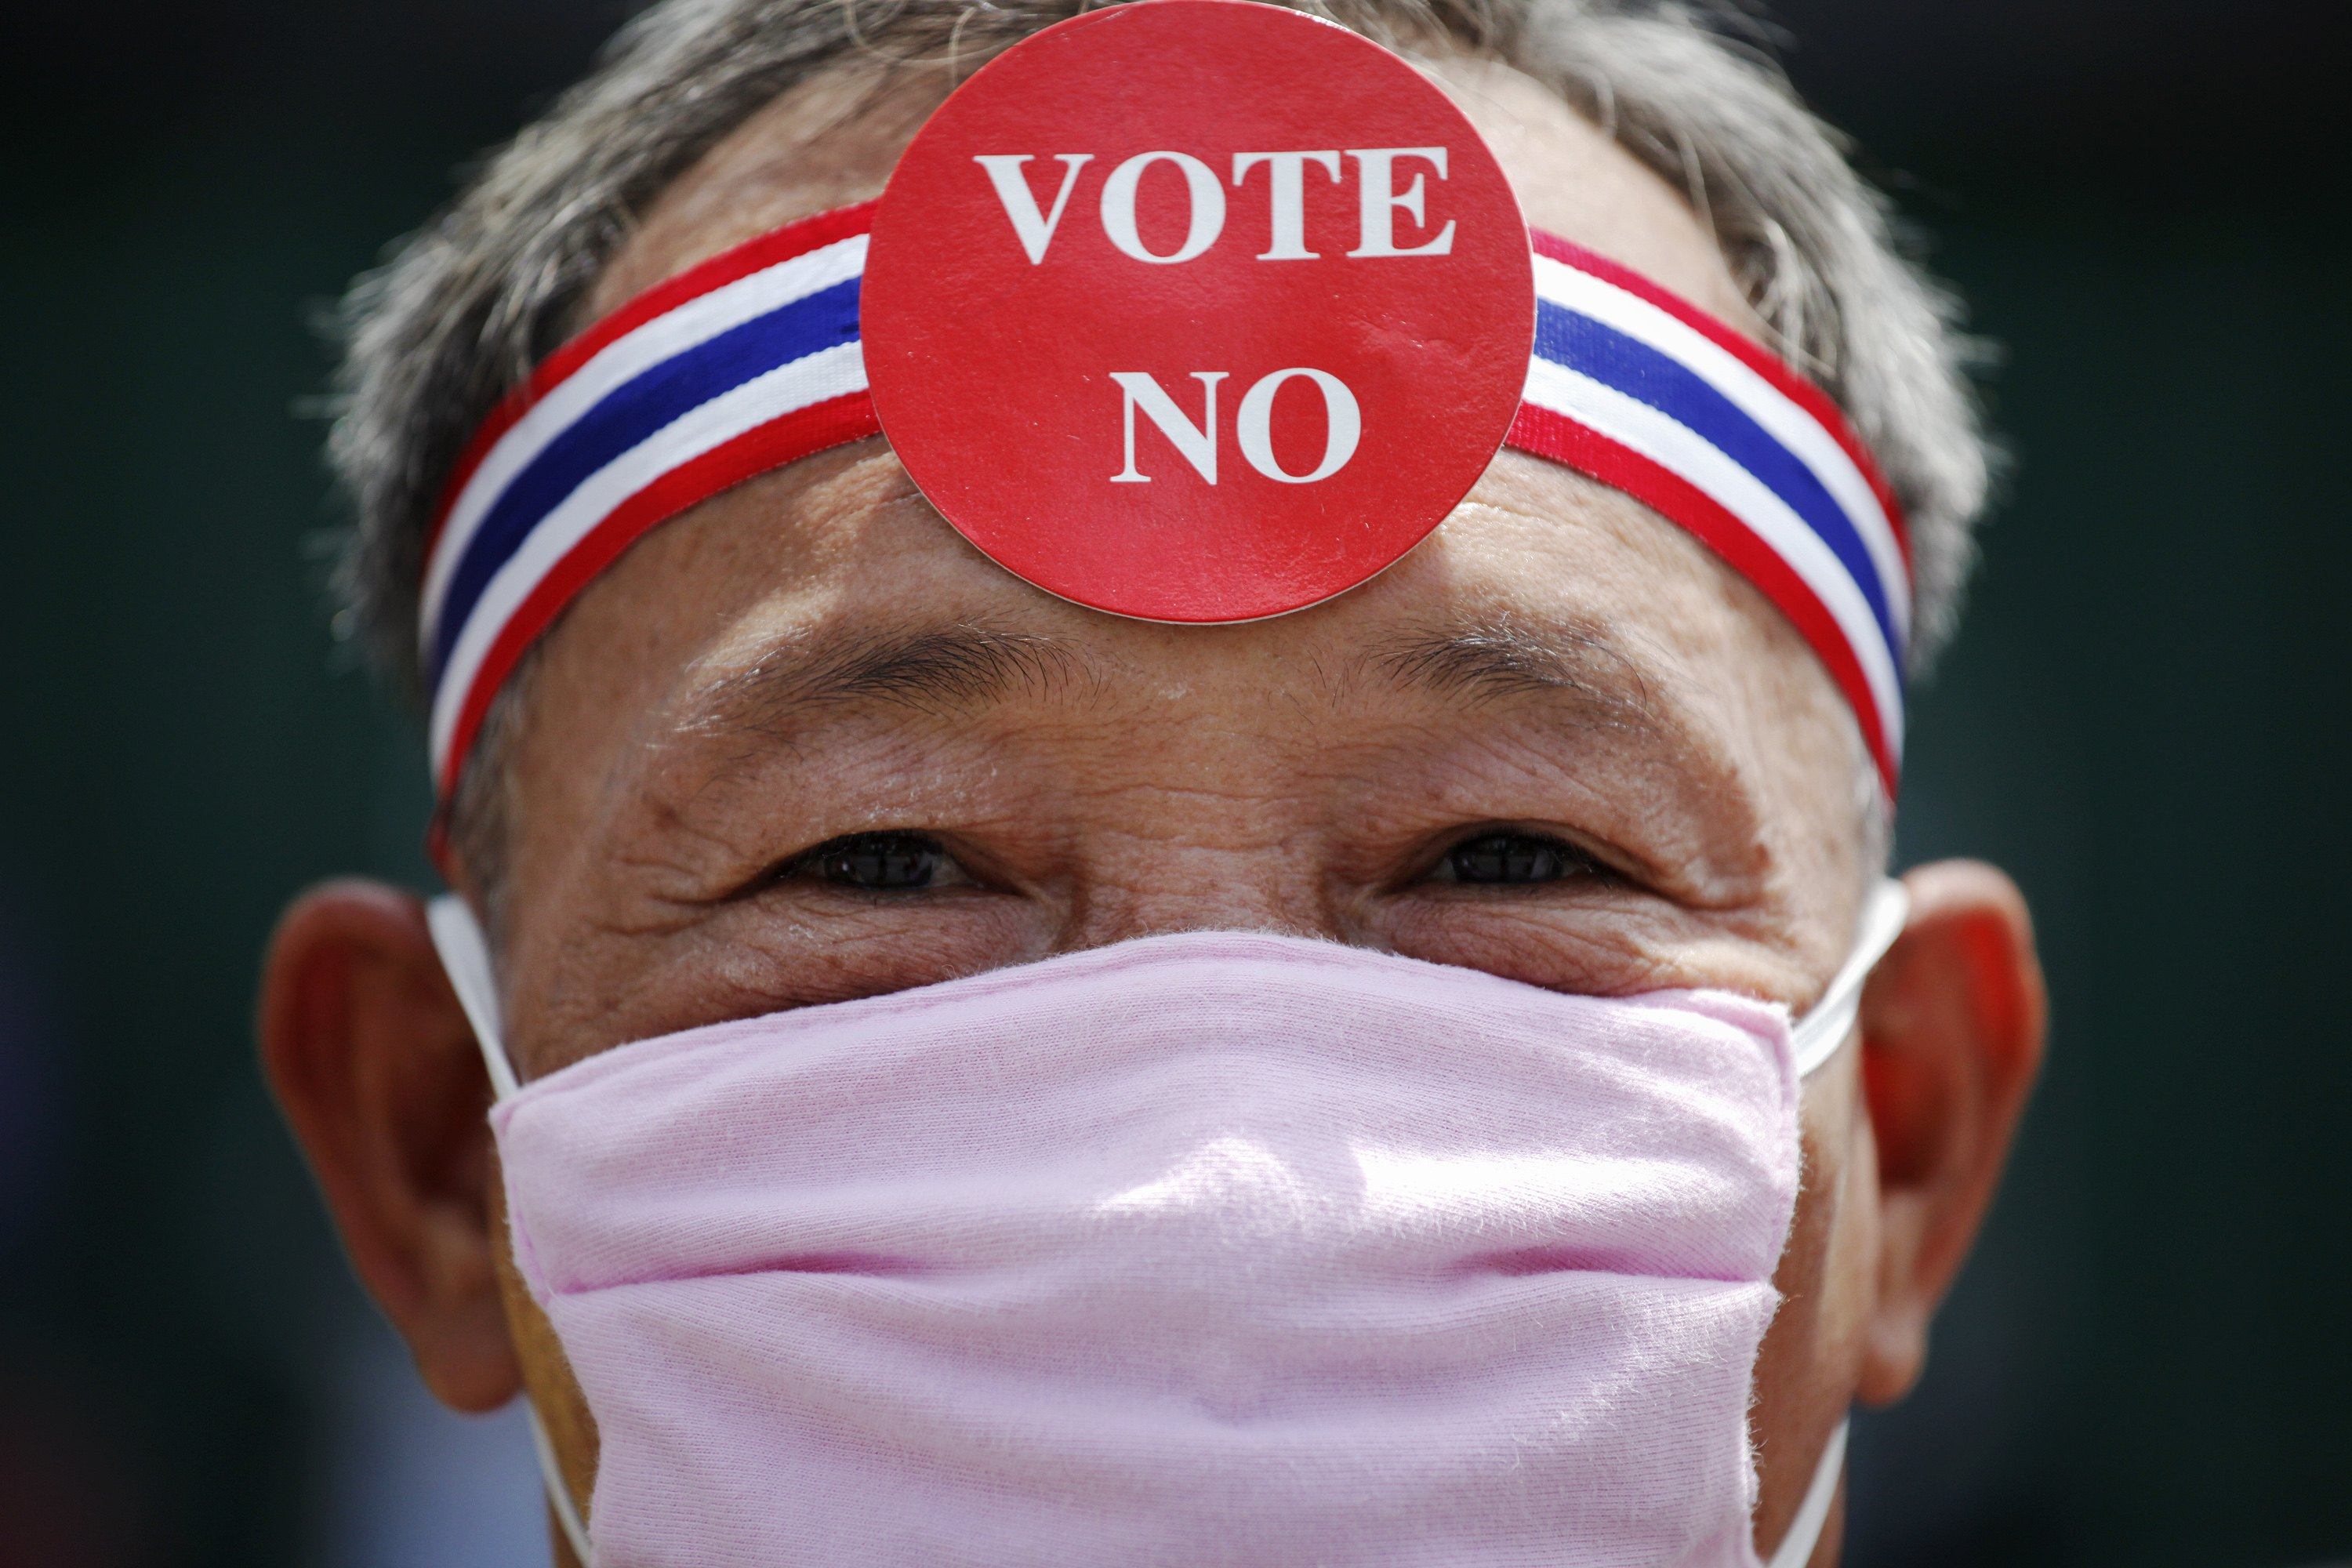 Zachary Abuza writes that Thai politics remains a dangerous mix of a very unpopular leader, from an unpopular party, who is likely to hold onto power, with insufficient pressure for the royalist-military establishment to make any meaningful reforms. Photo: Reuters/File